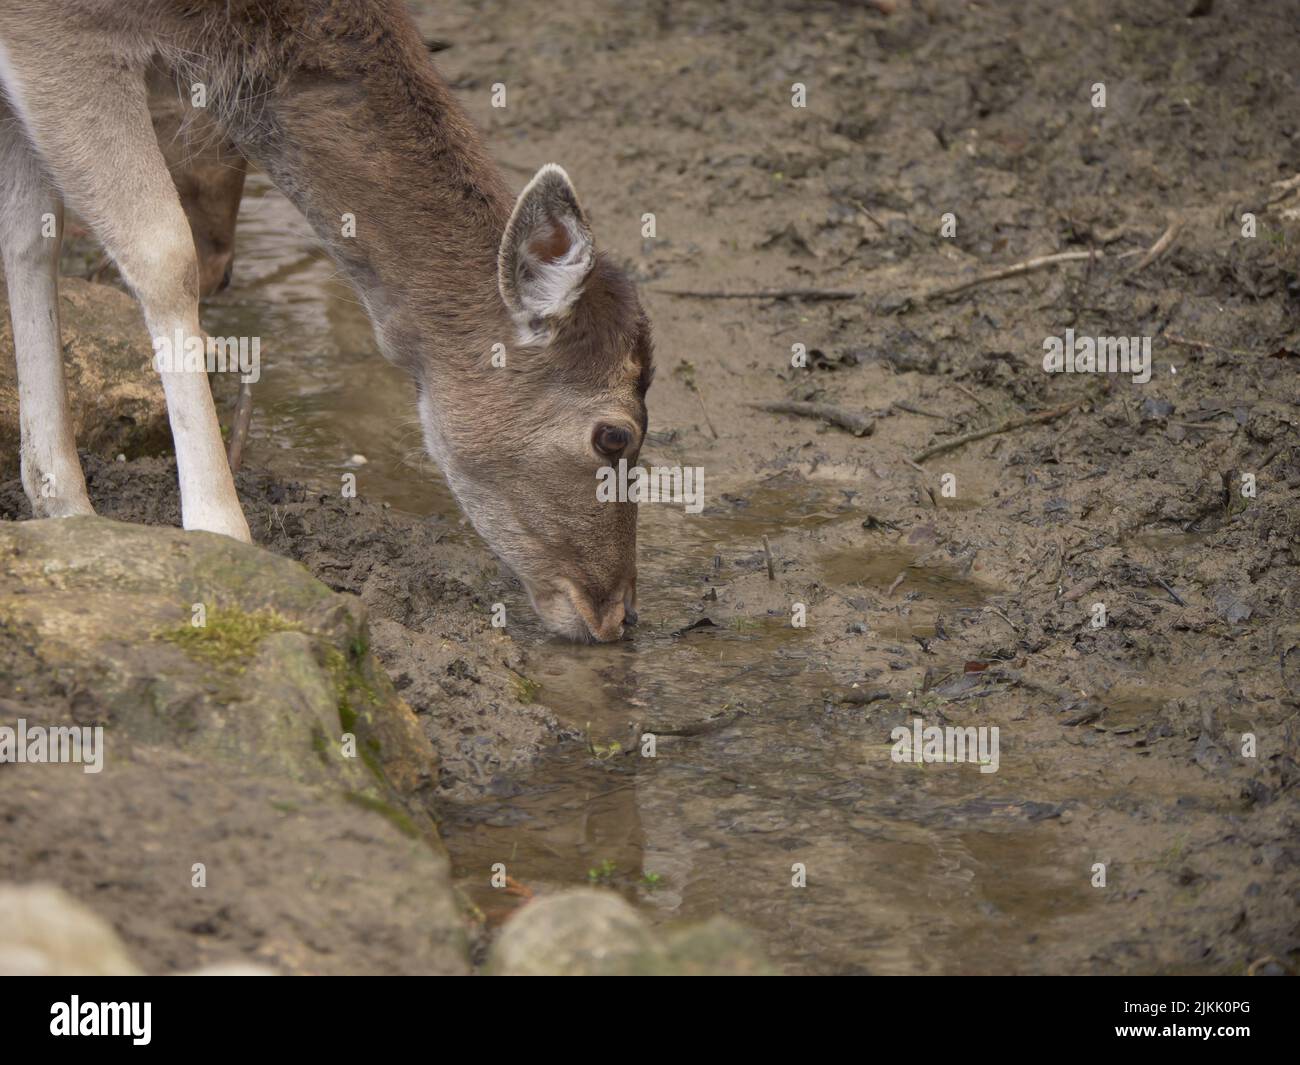 A closeup of a baby deer with its head hanging and drinking muddy water from a narrow stream in a zoo Stock Photo